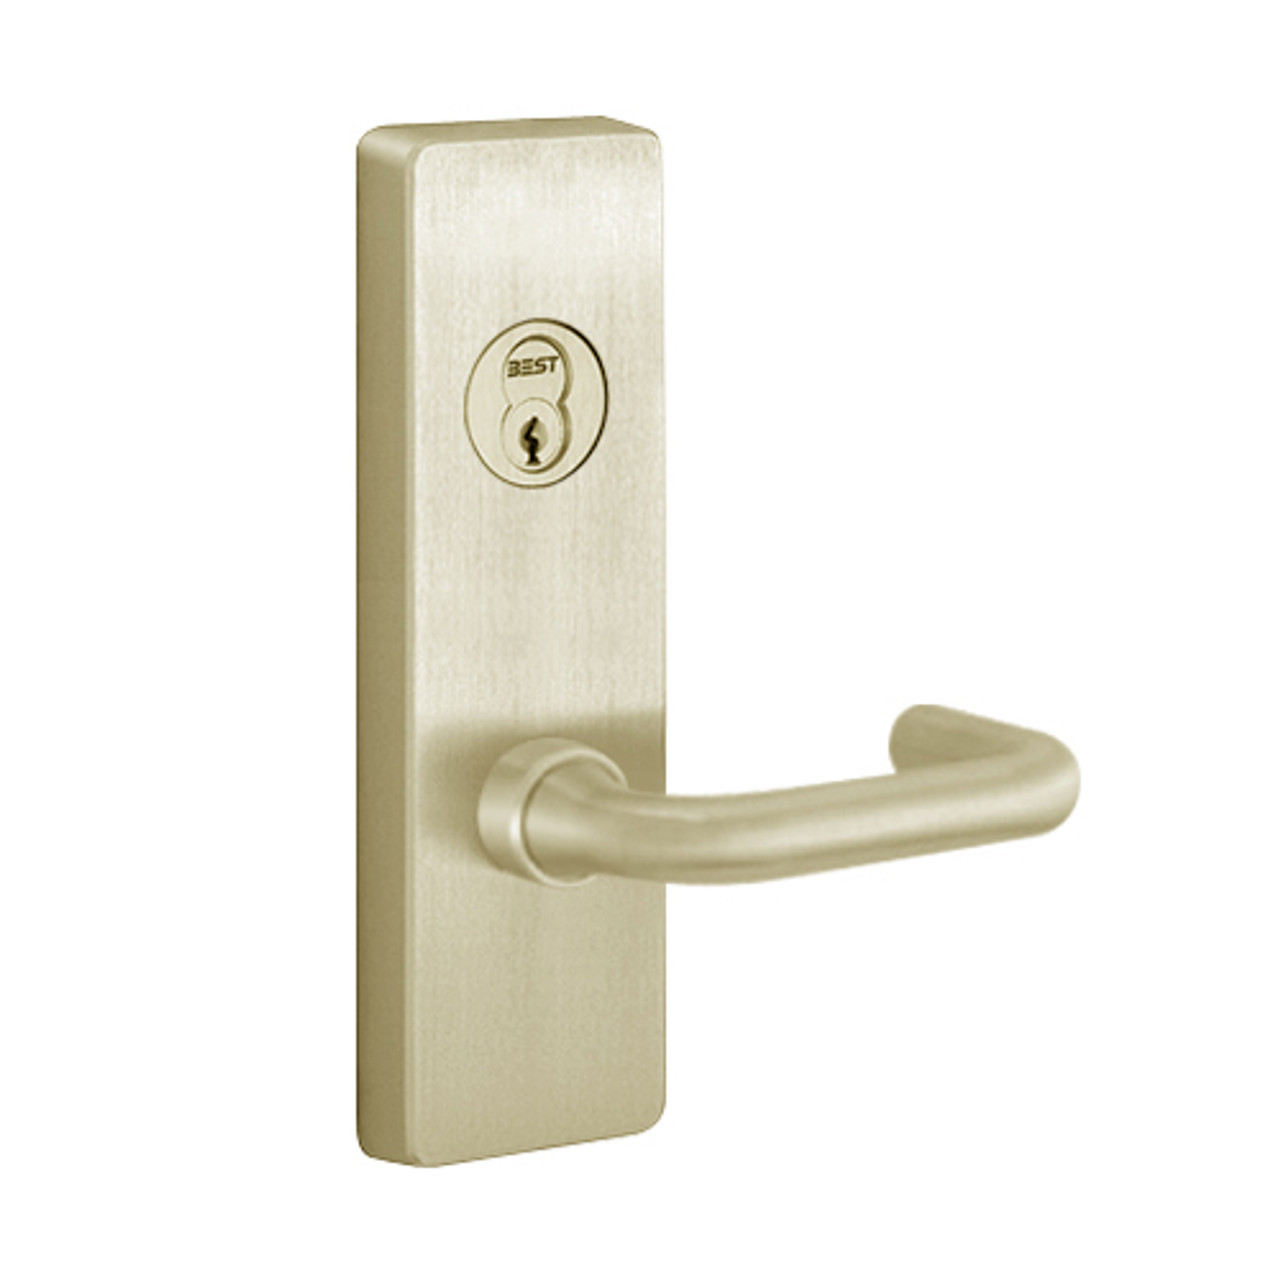 R4903C-606-LHR PHI Key Retracts Latchbolt Retrofit Trim with C Lever Design for Apex and Olympian Series Exit Device in Satin Brass Finish